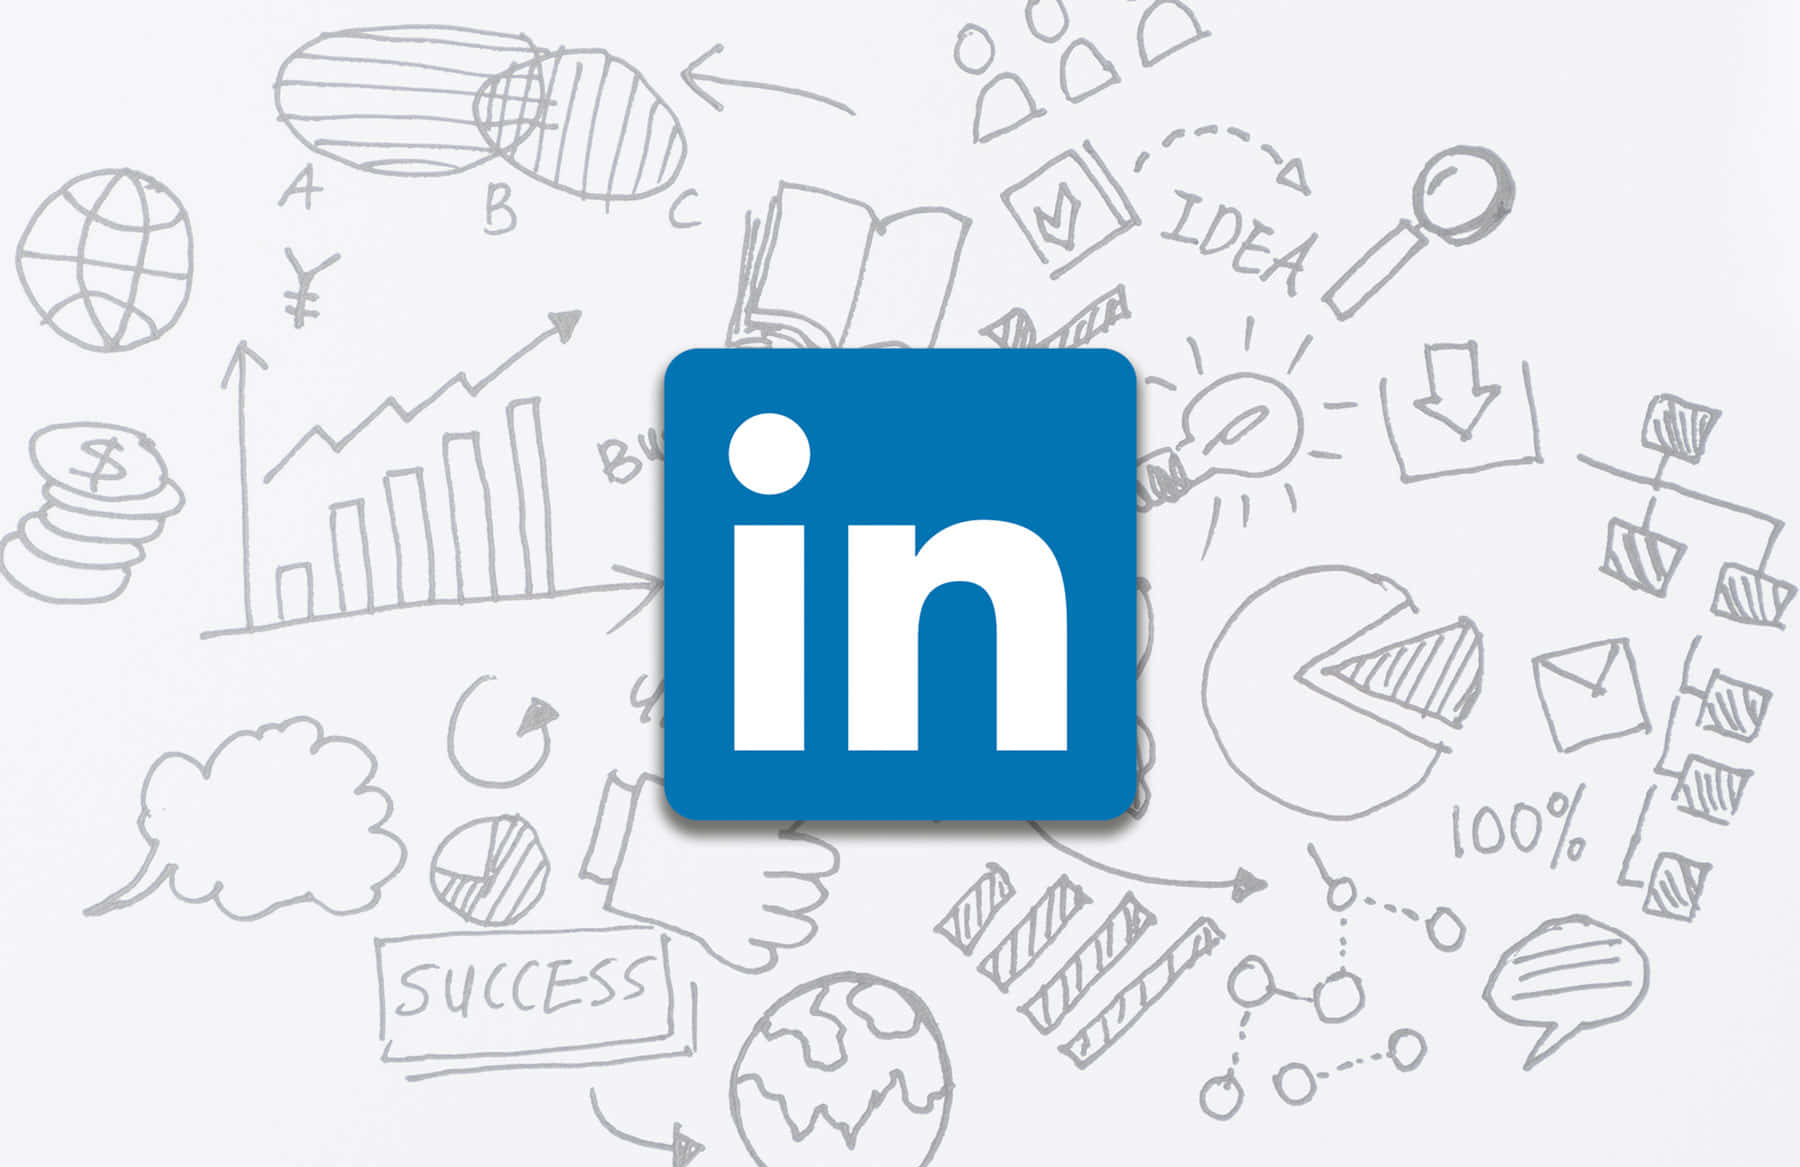 Maximize Your Professional Network With LinkedIn